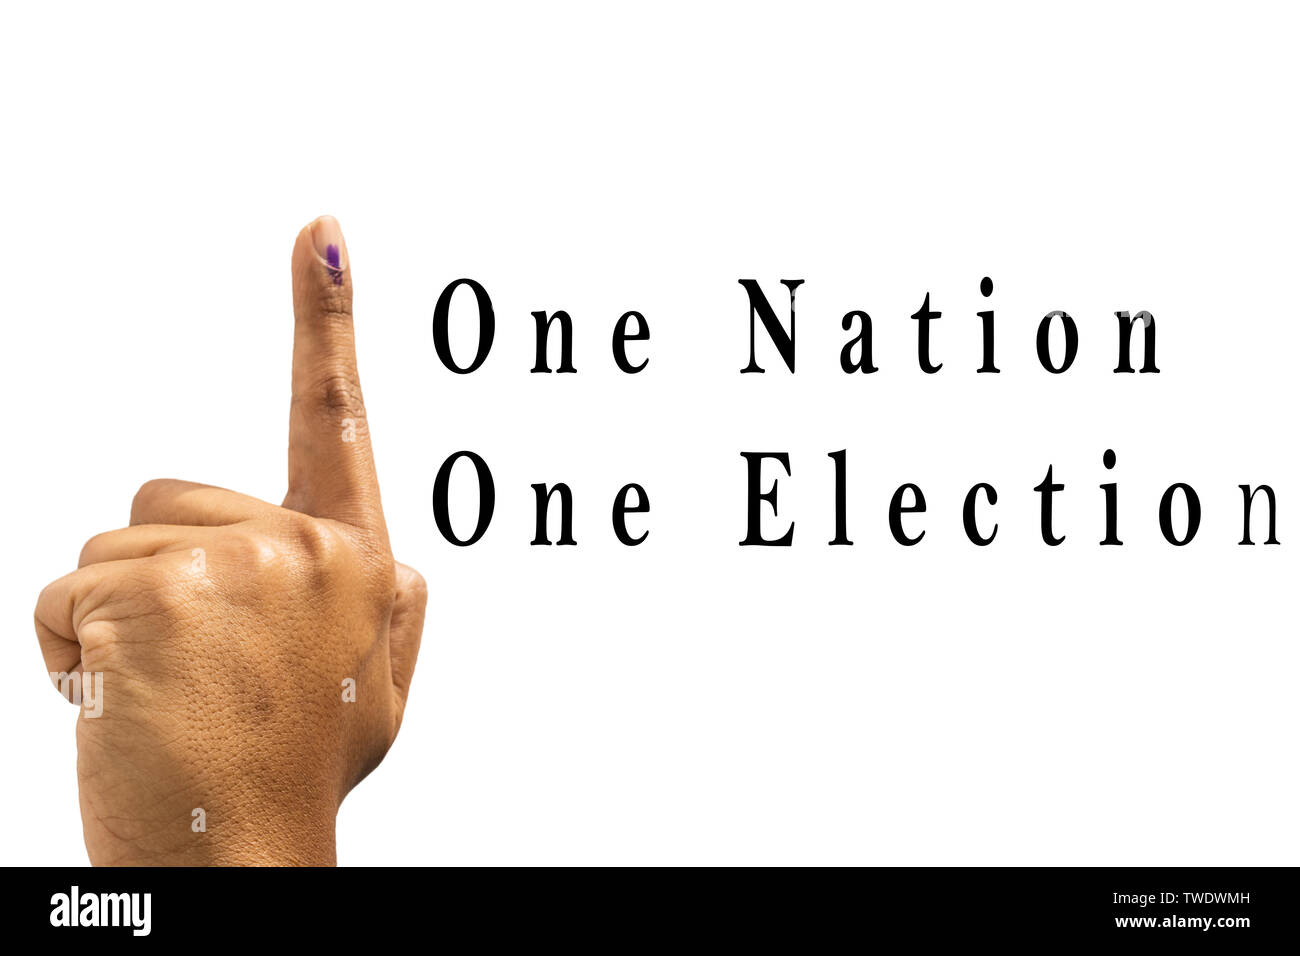 One Nation One Election with hand gesture of Indian Election on Isolated background. Stock Photo